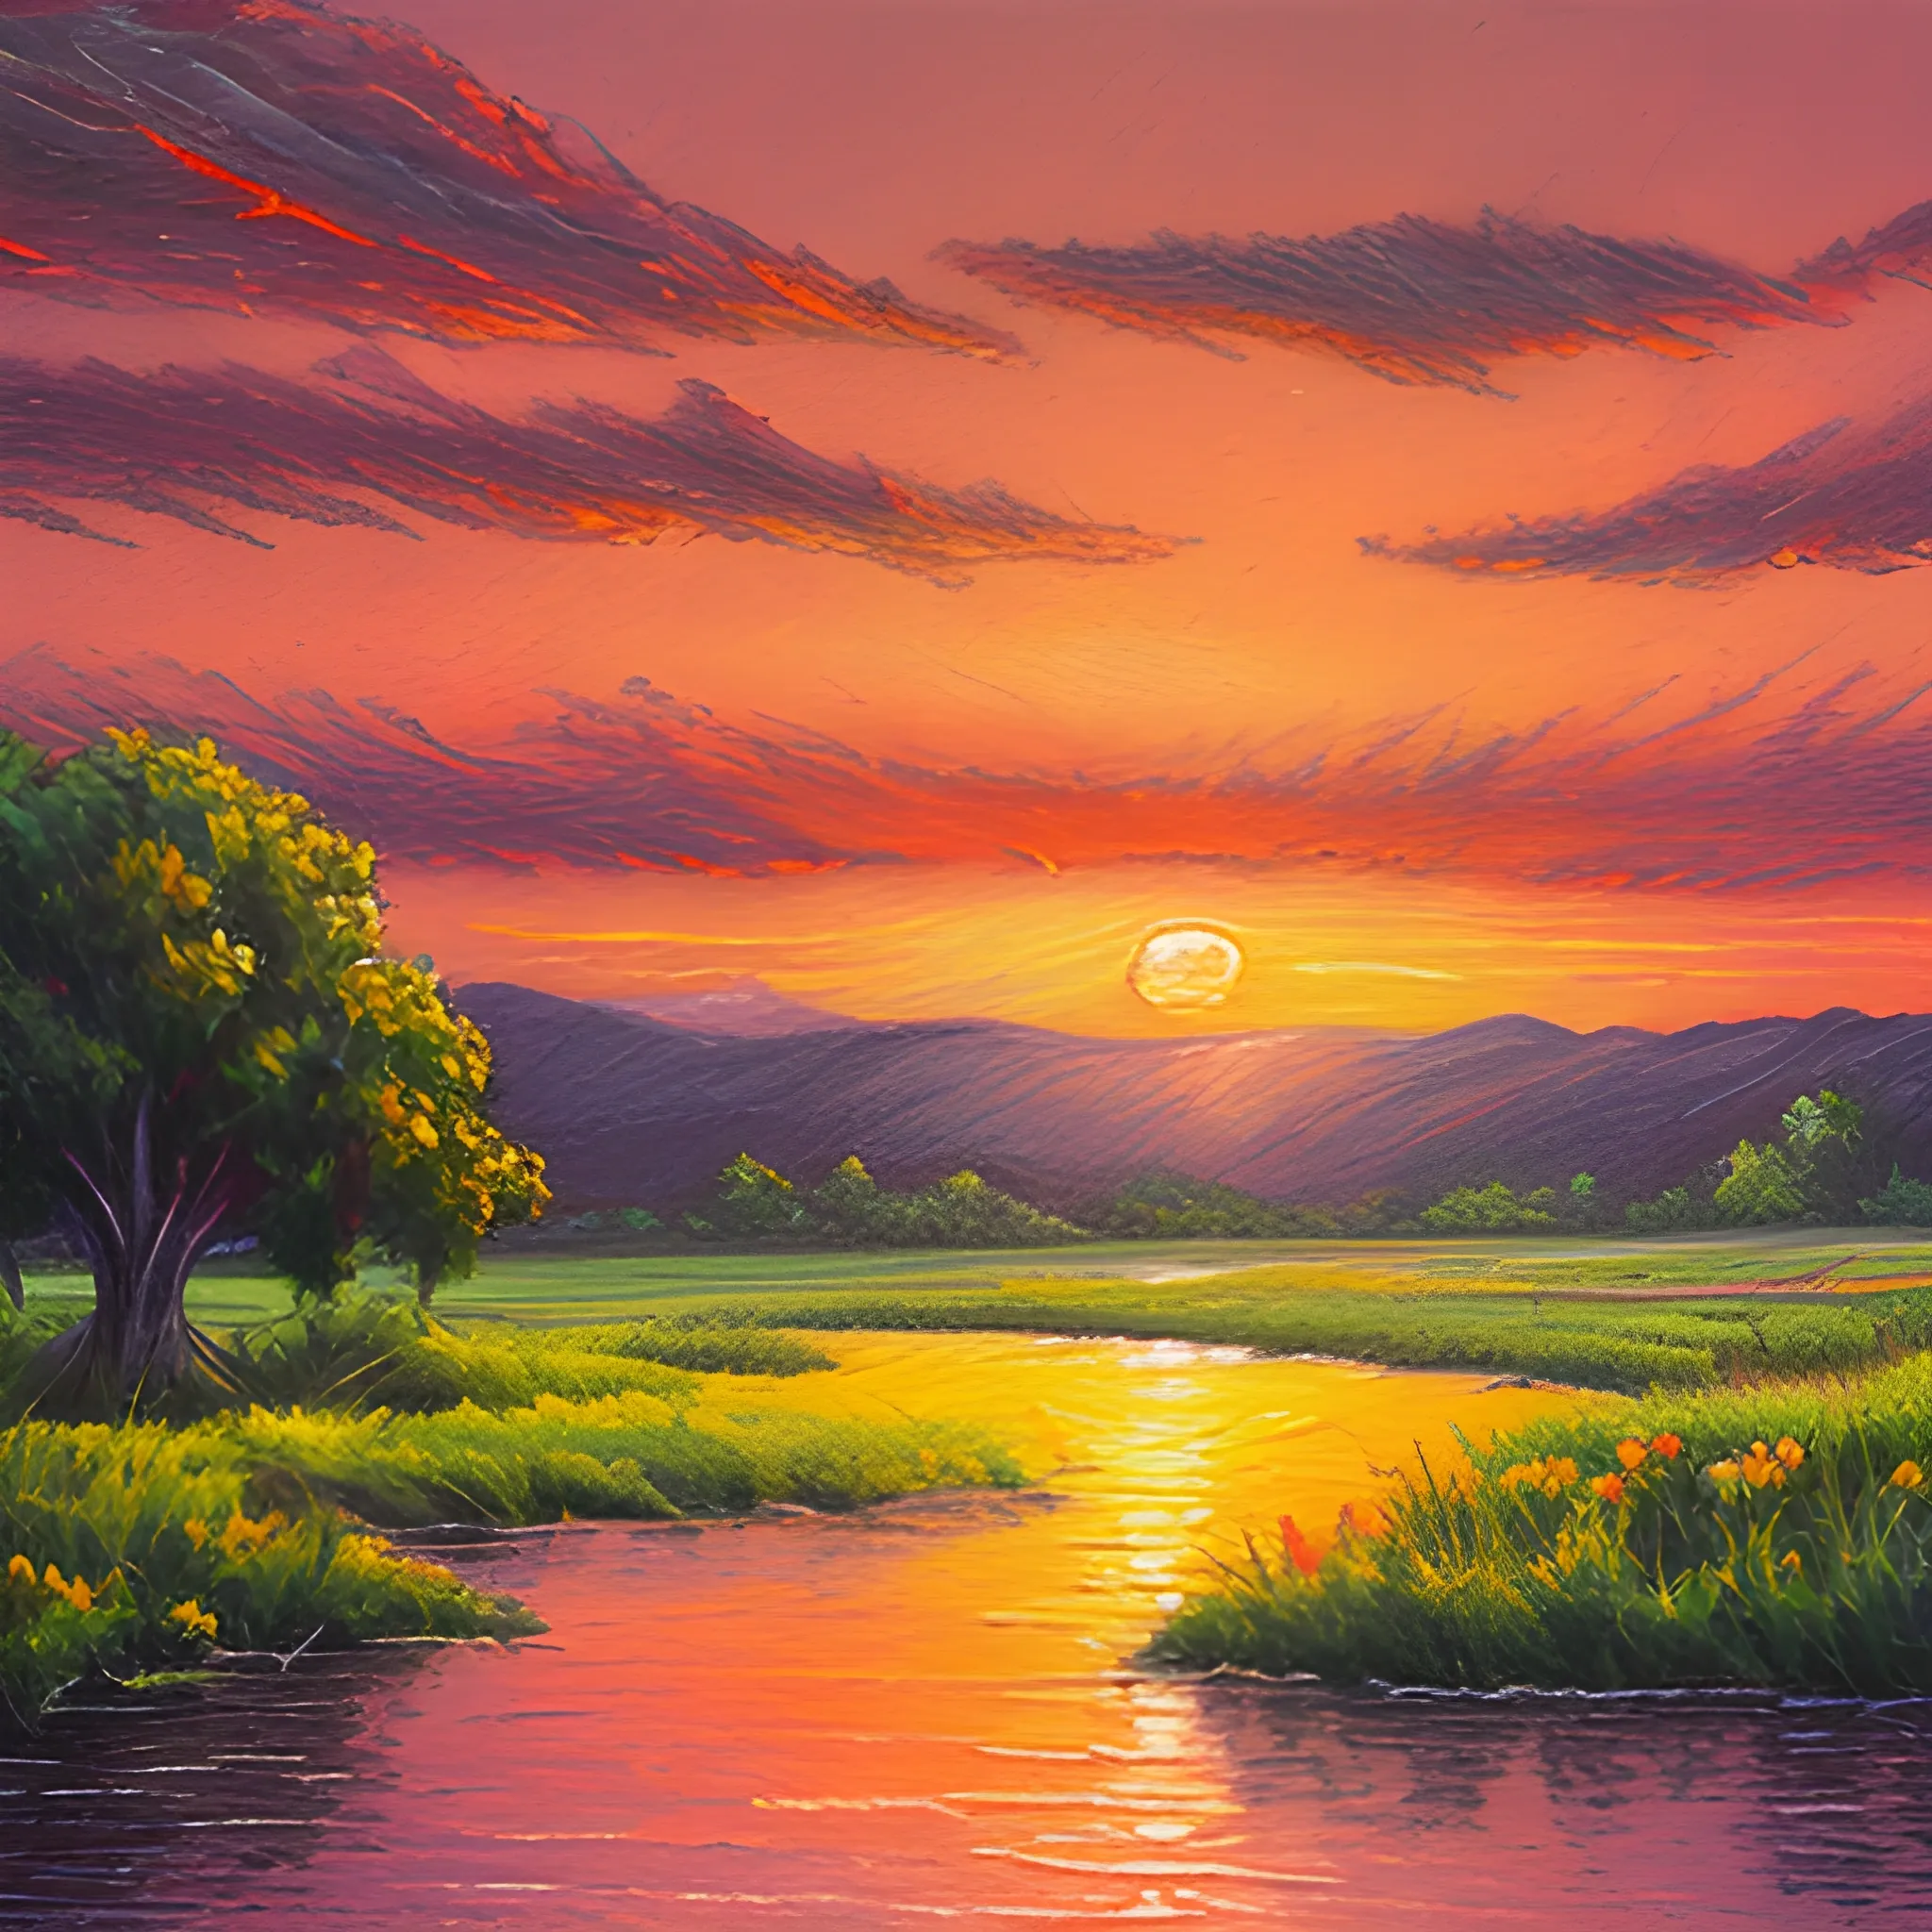 Sunset landscape painting, oil painting style, Pencil Sketch - Arthub.ai